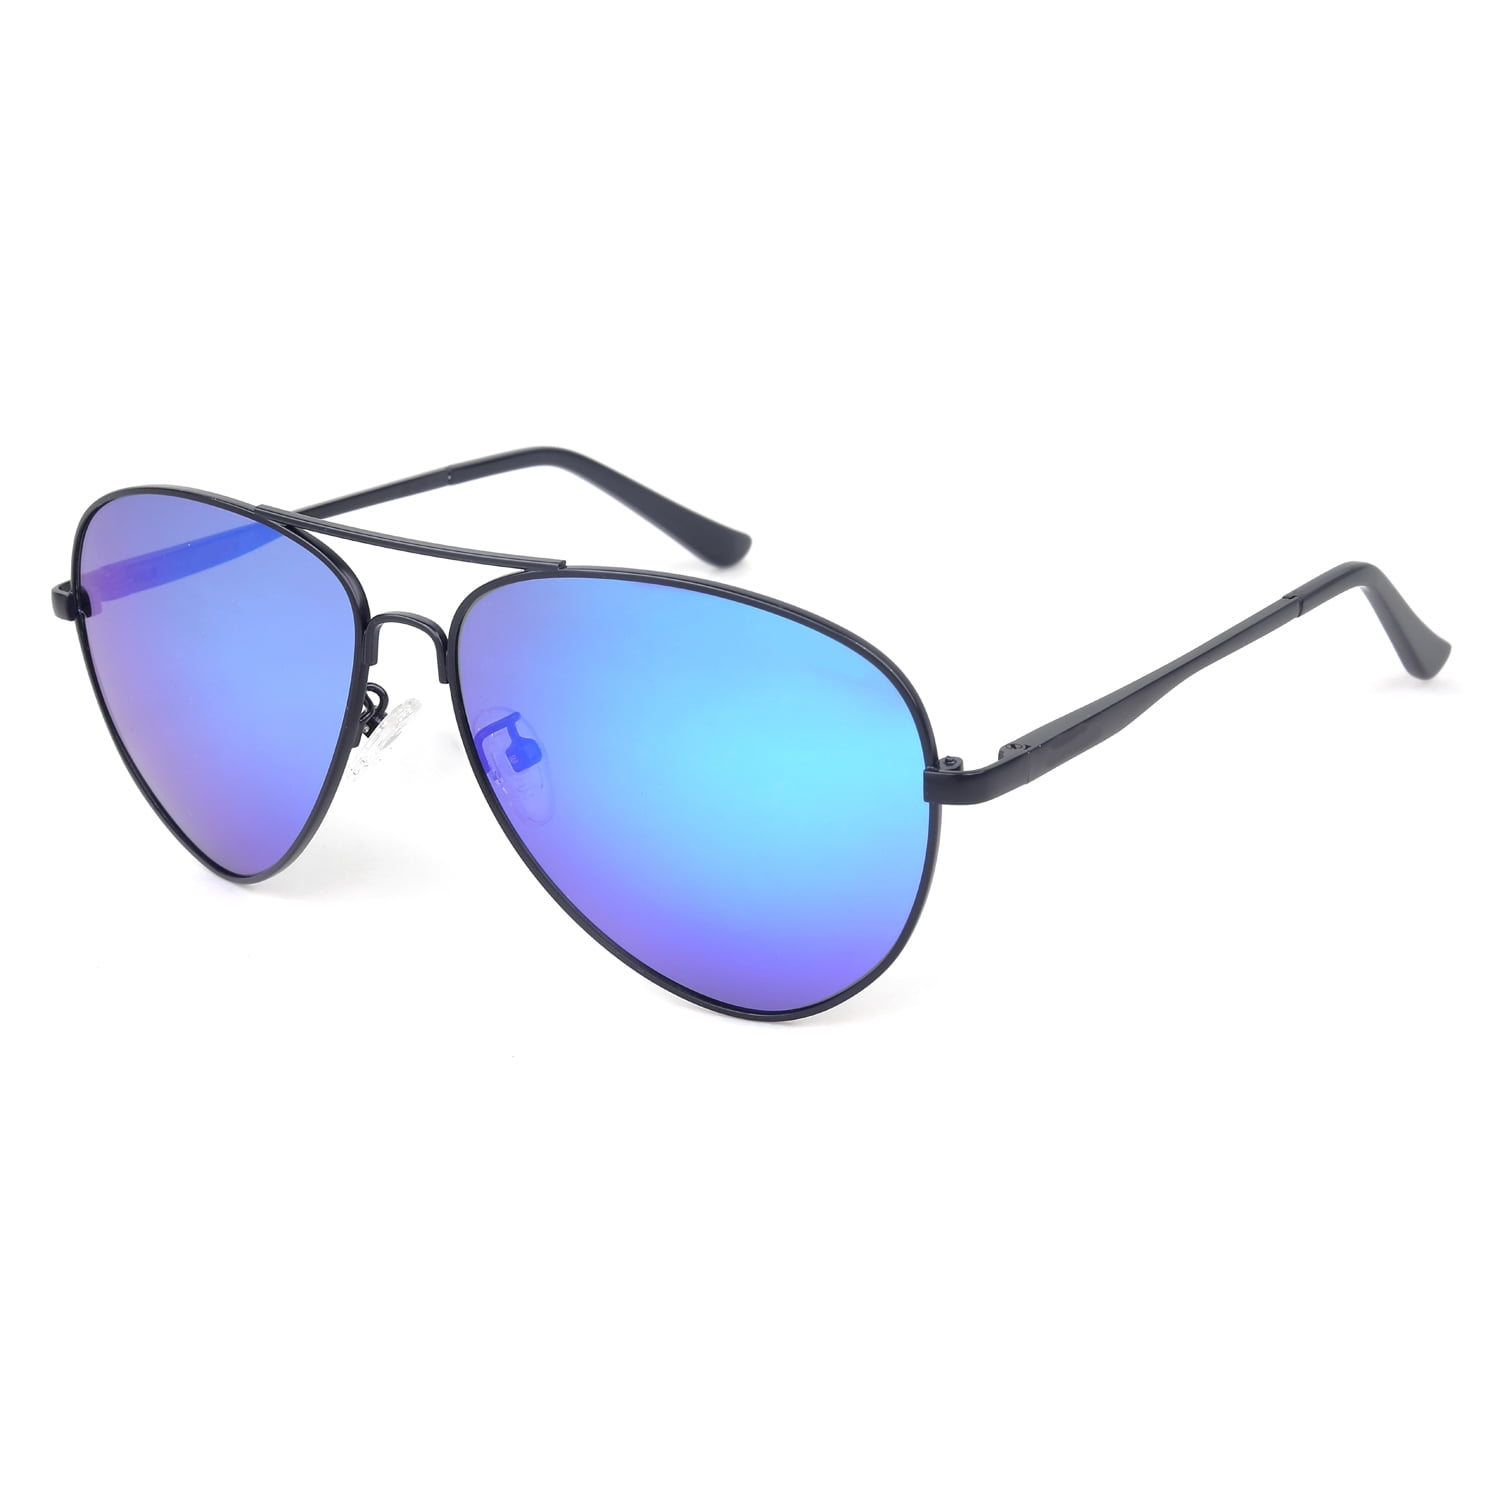 100% Polarized Style with Metal Lenses, Vintage Protection, Sunglasses Gold, Blue GO JUST UV Revo Frame Matte Aviator Case,